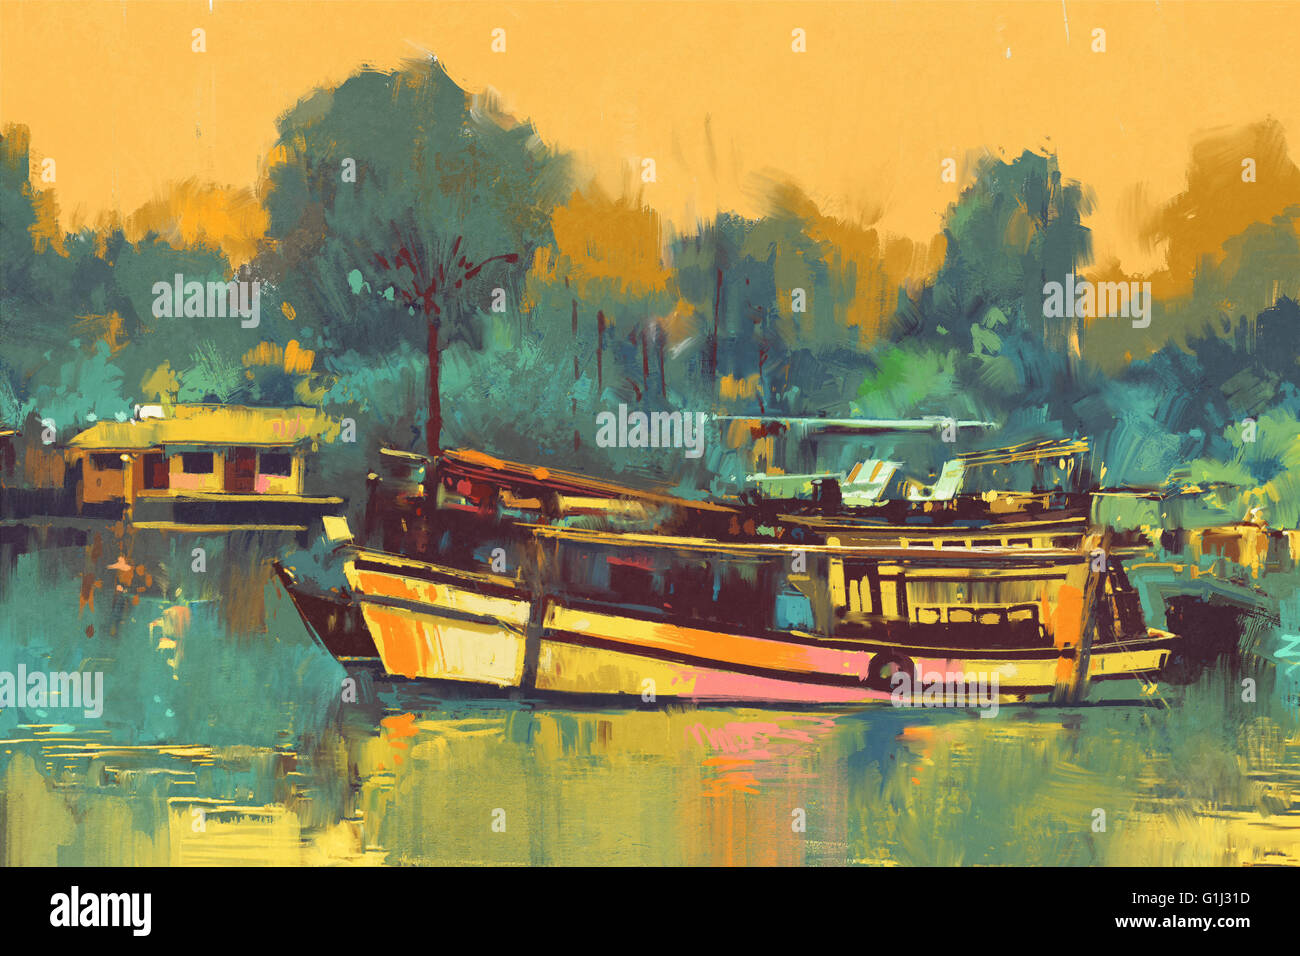 colorful painting of boat for the transportation on river Stock Photo